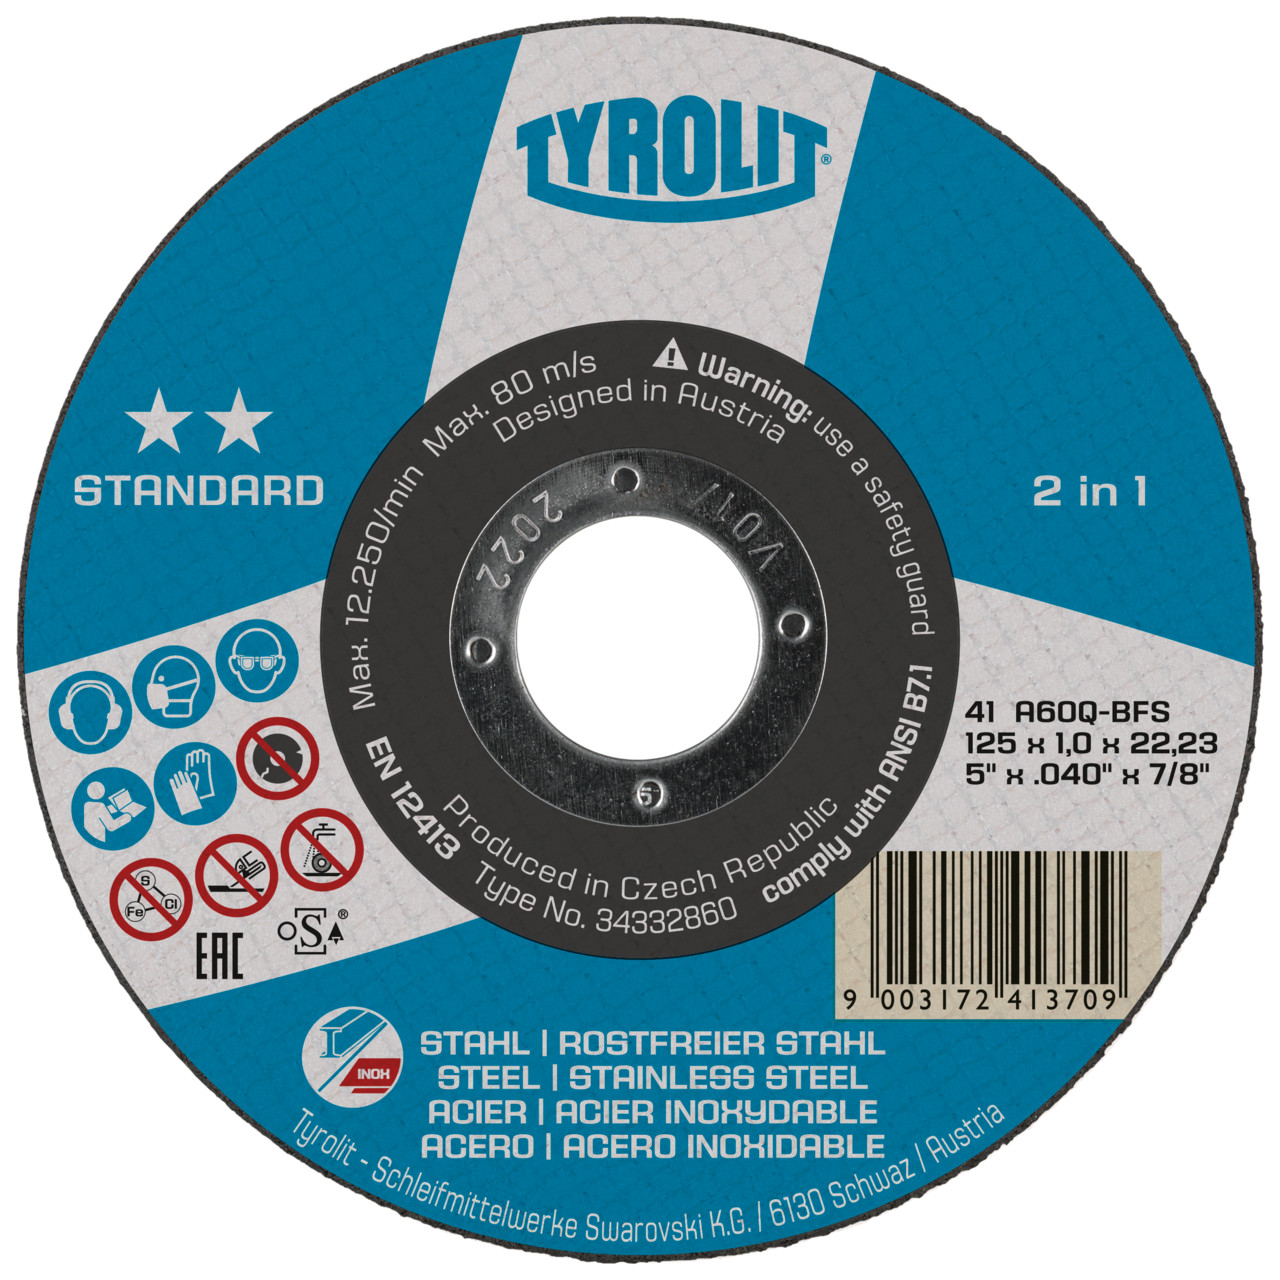 Tyrolit Cutting discs DxDxH 125x1.0x22.23 2in1 for steel and stainless steel, shape: 41 - straight version, Art. 34332860